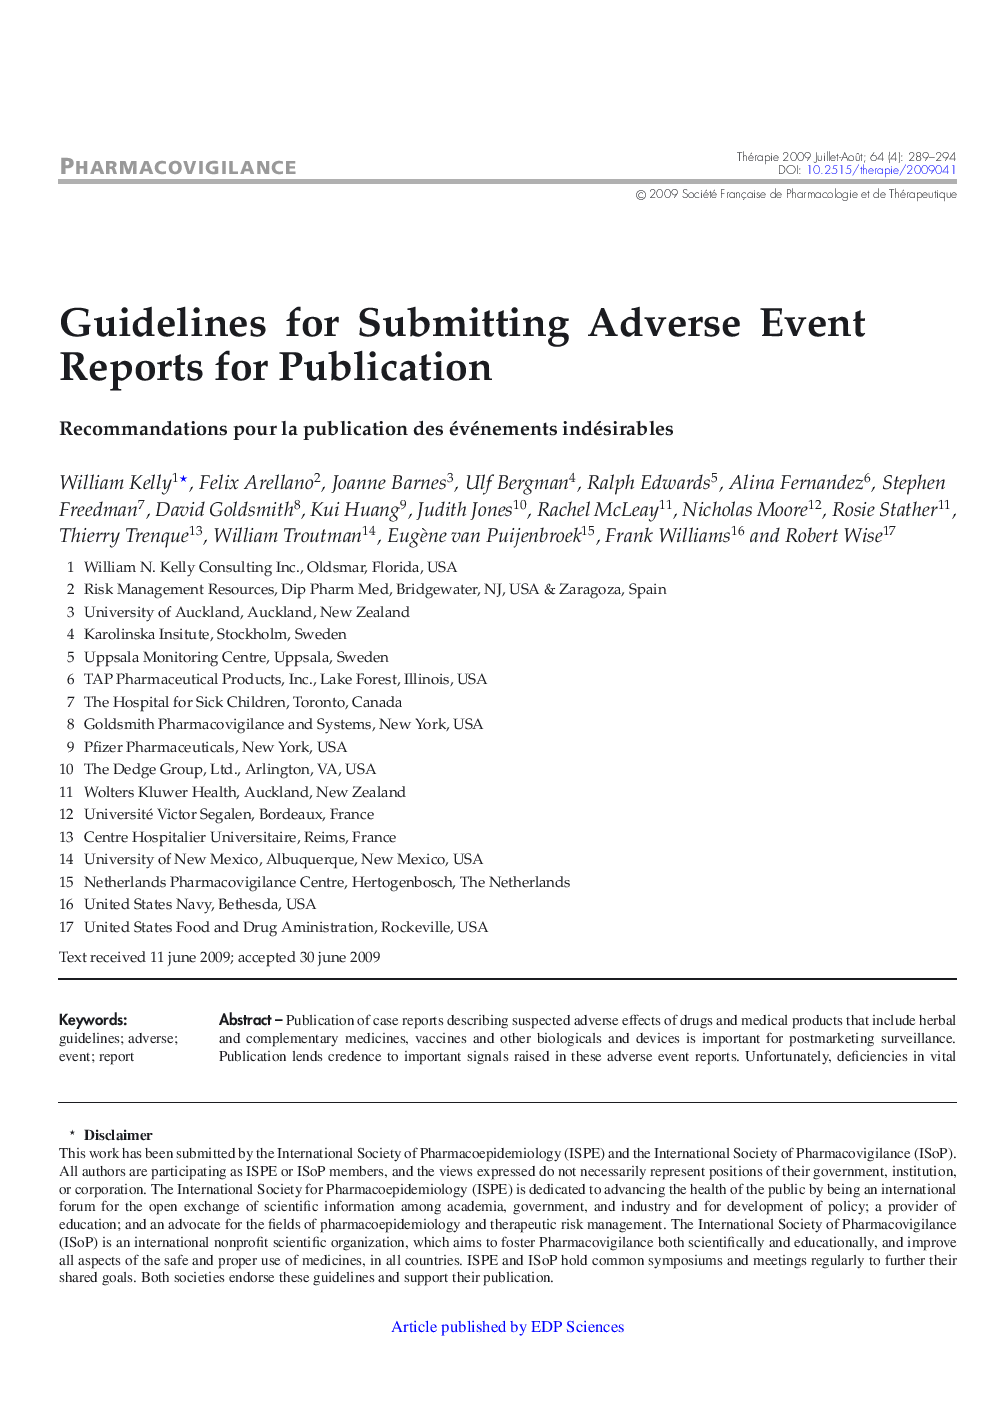 Guidelines for Submitting Adverse Event Reports for Publication